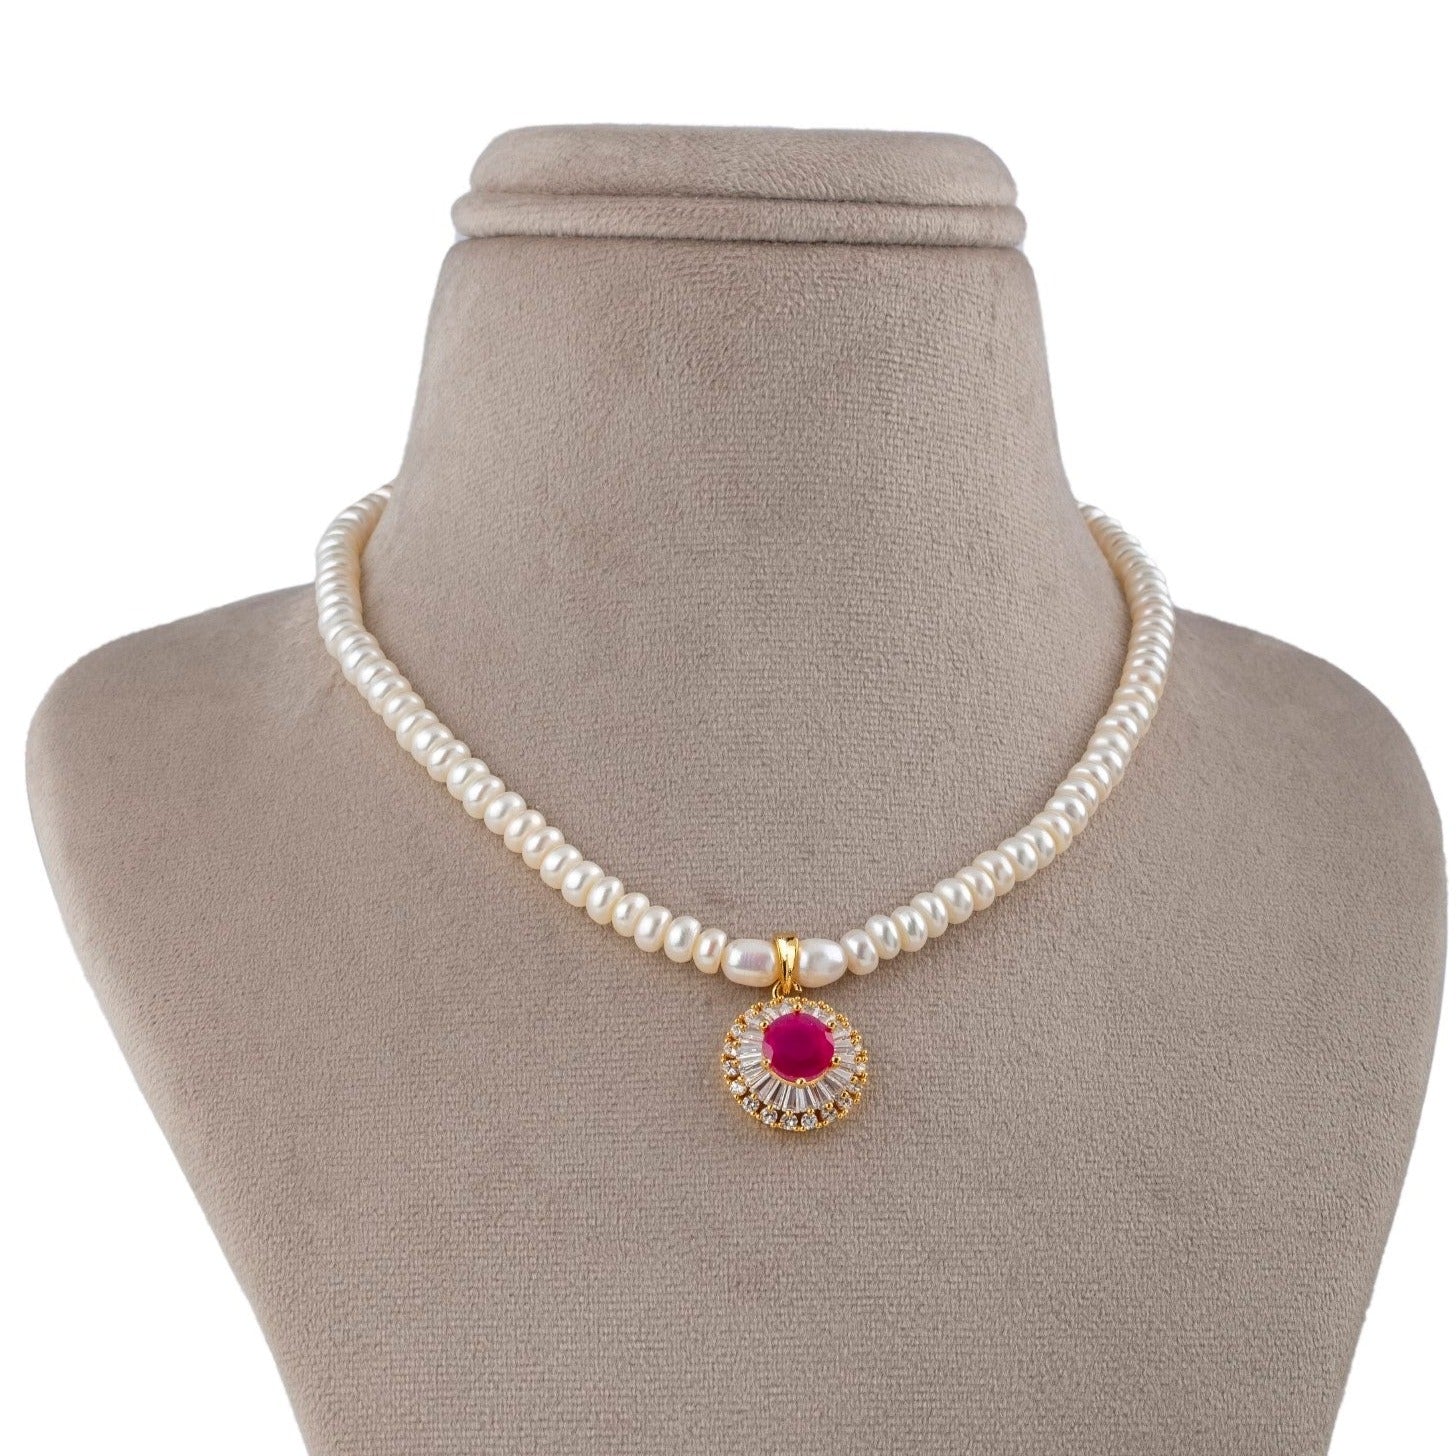 Regal Ruby and Pearl jewelry Set